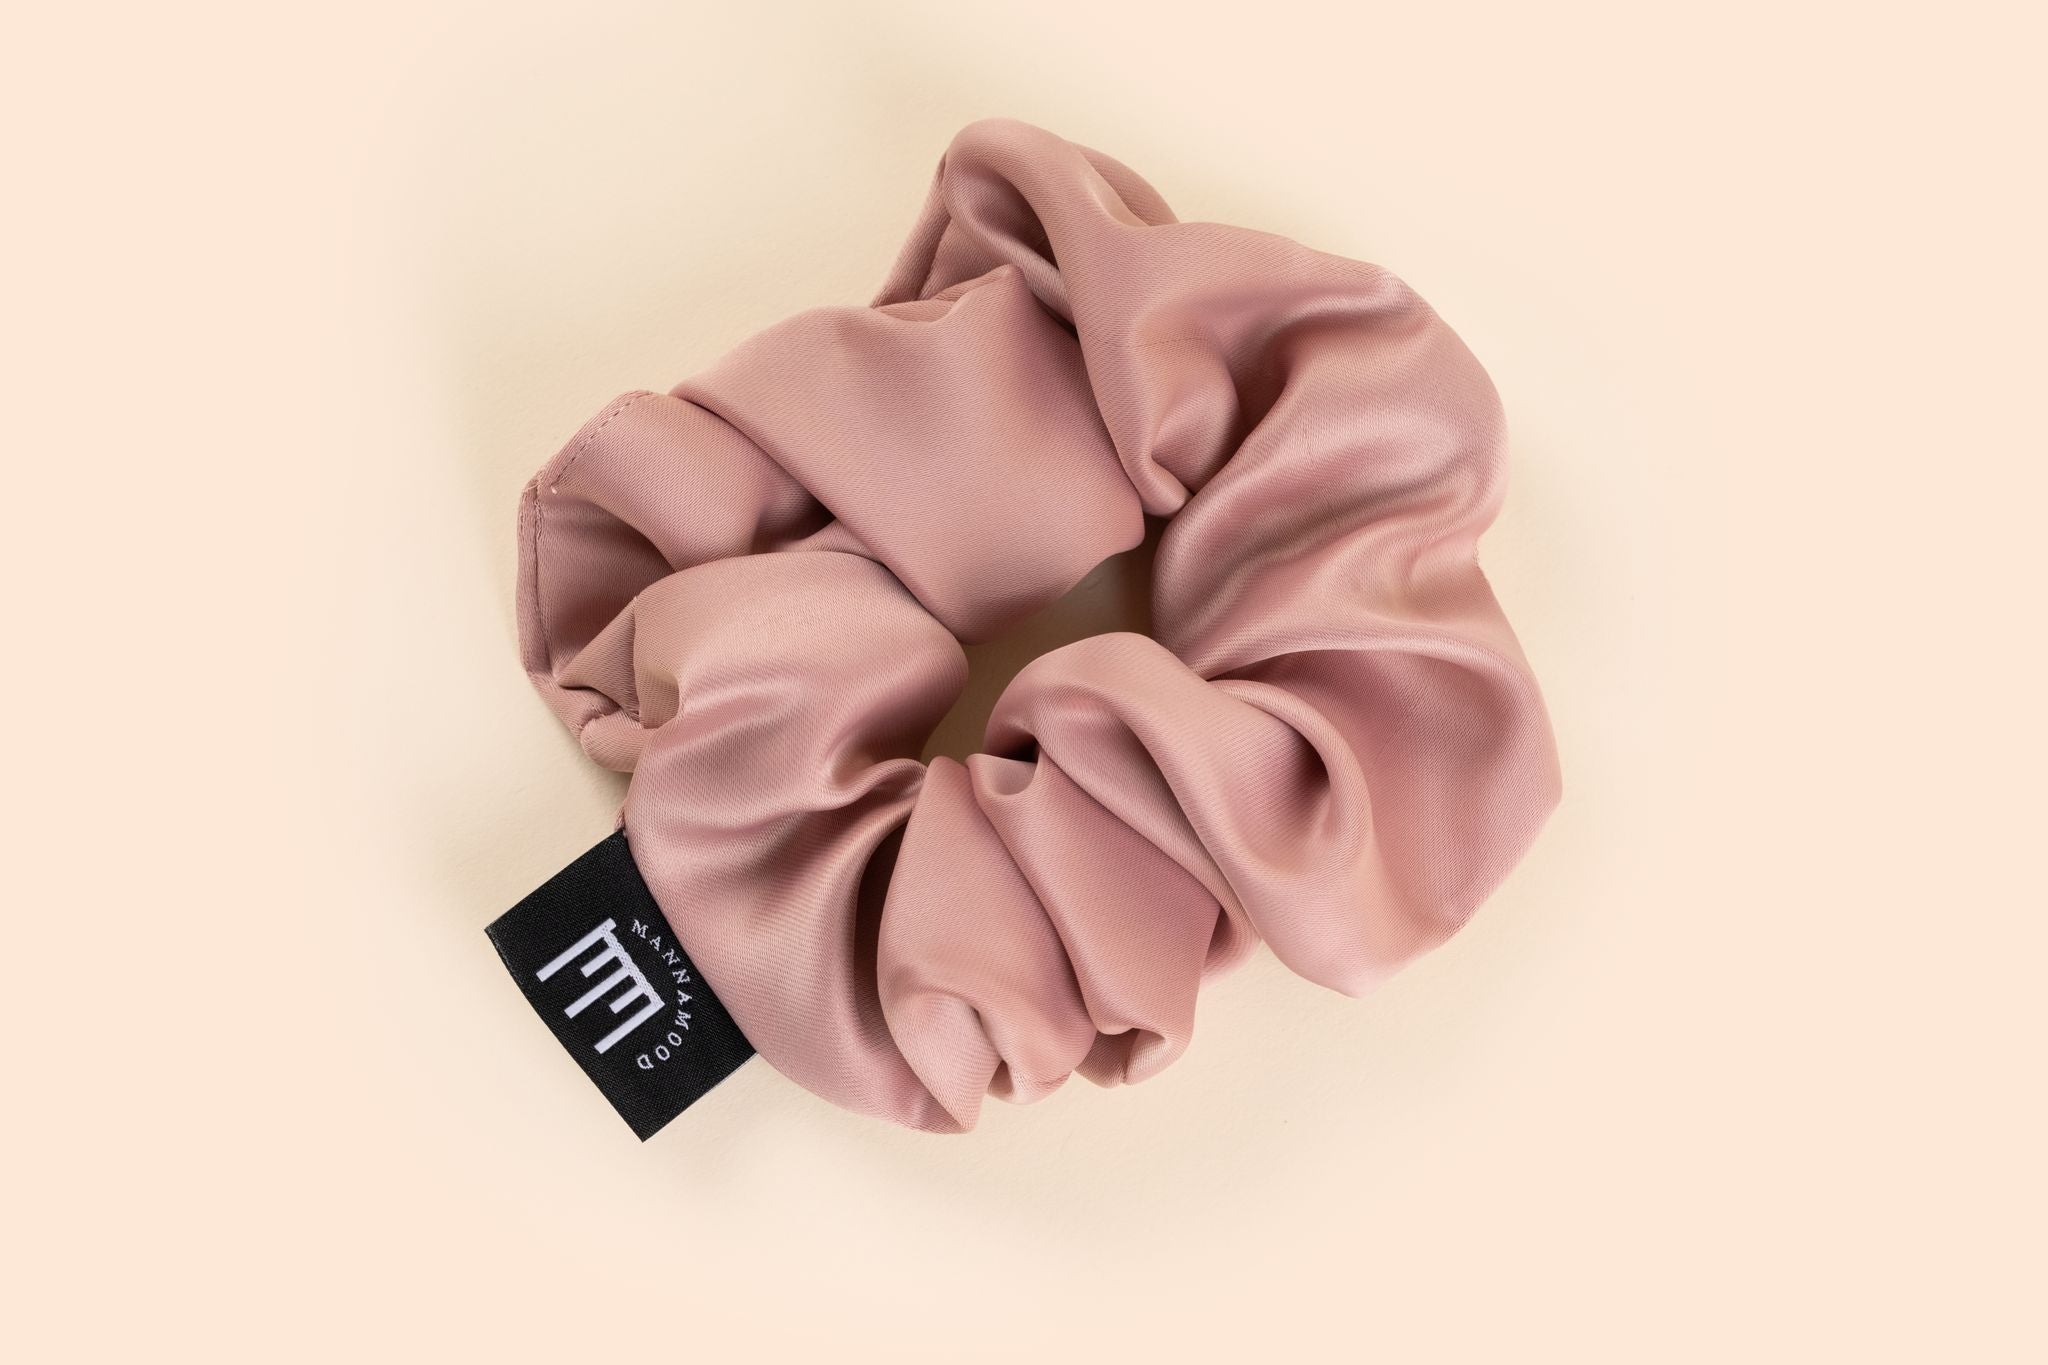 The humble scrunchie gets a luxe makeover